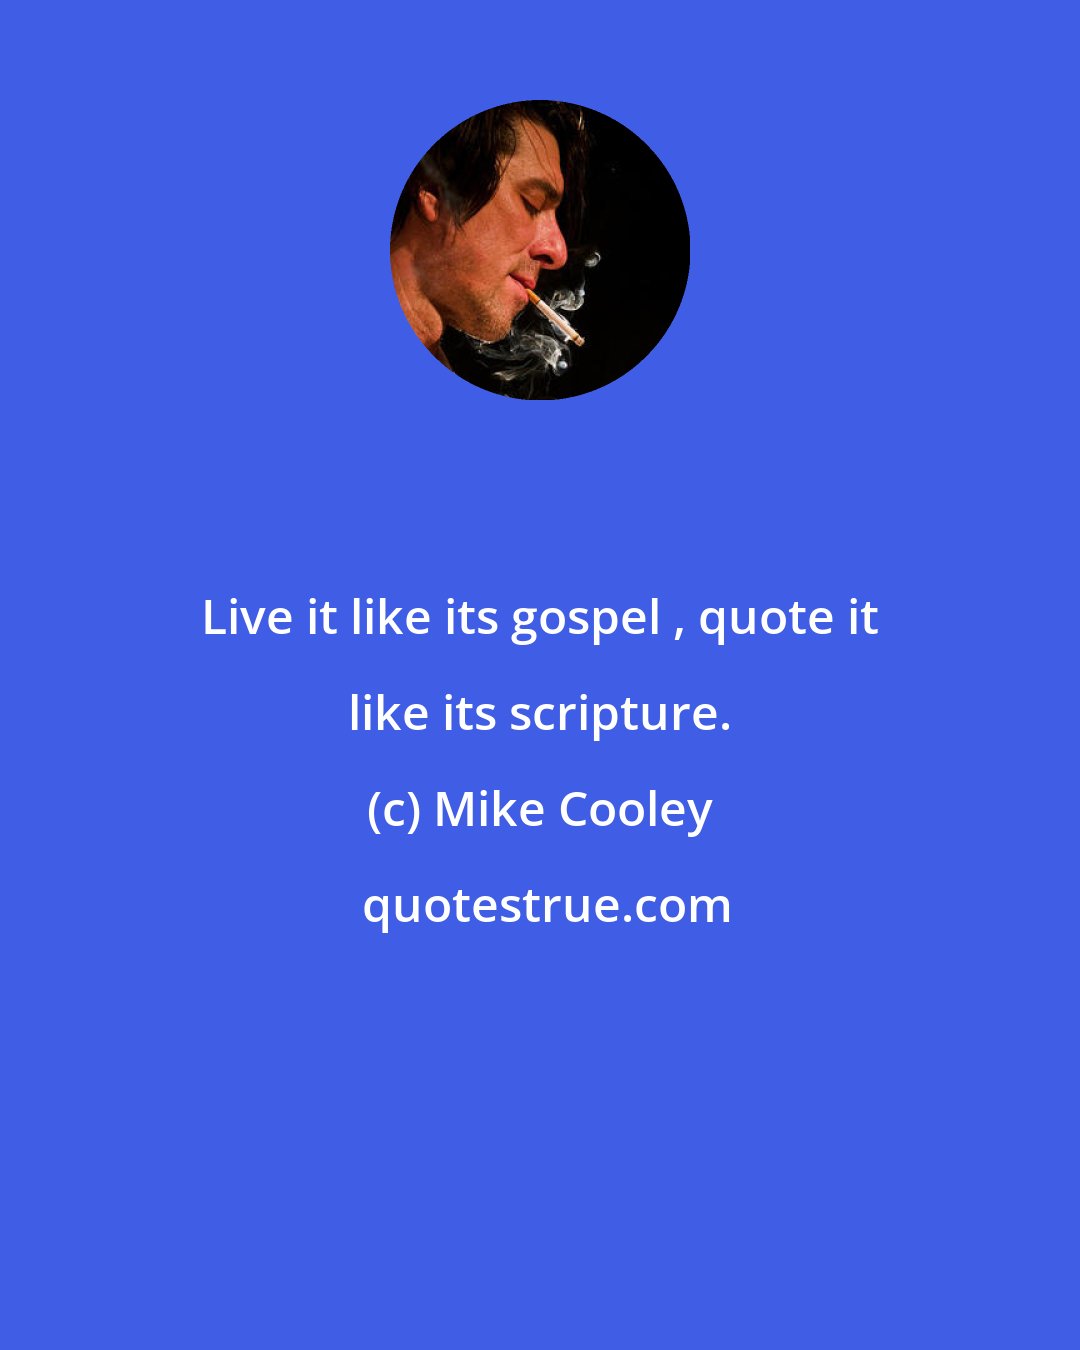 Mike Cooley: Live it like its gospel , quote it like its scripture.